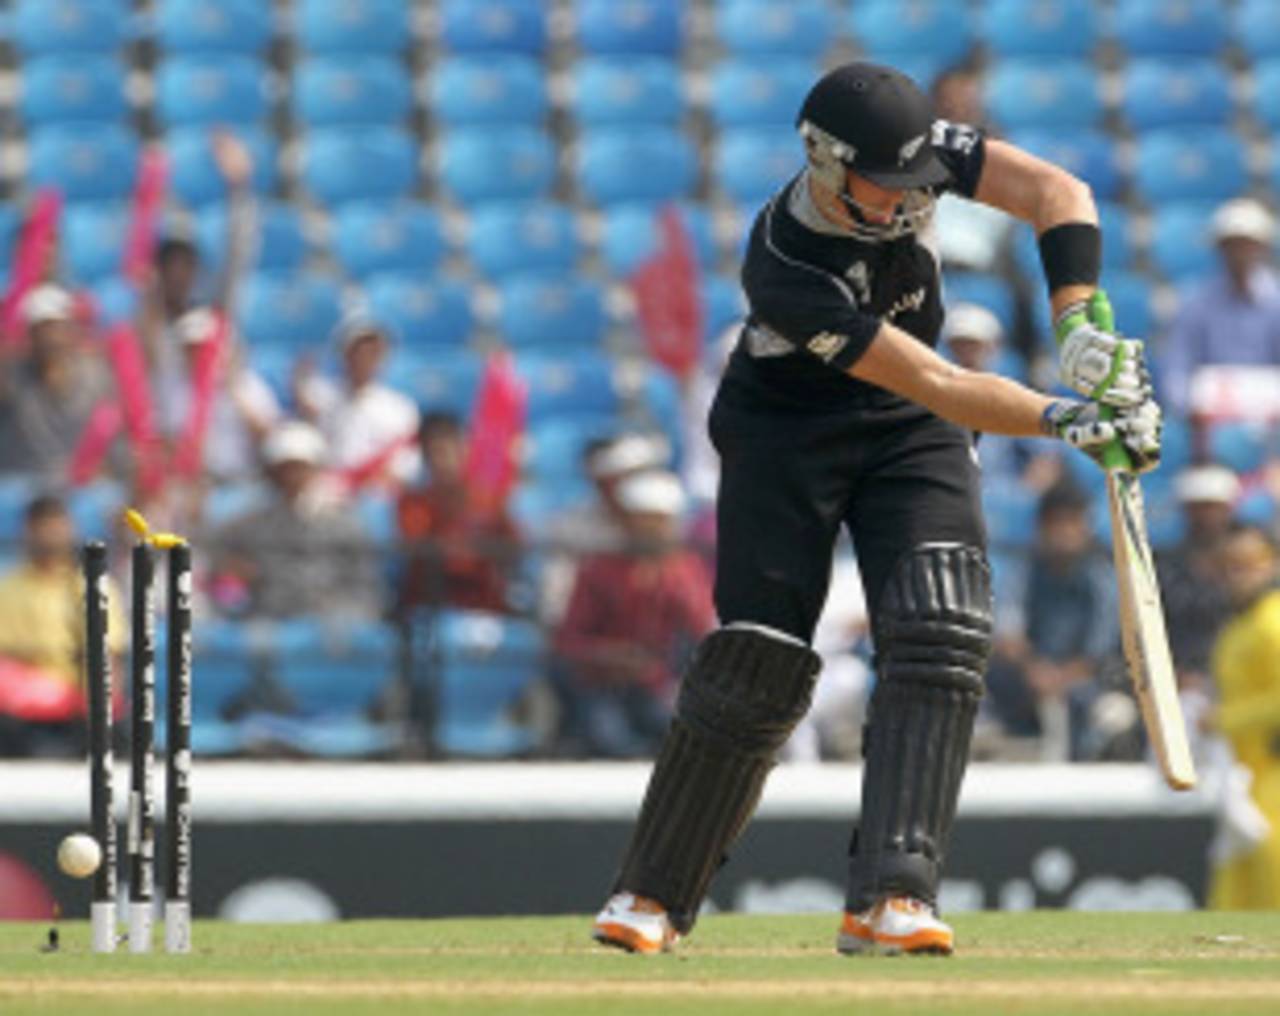 Martin Guptill was bowled for 10, Australia v New Zealand, World Cup, Group A, Nagpur, February 25, 2011